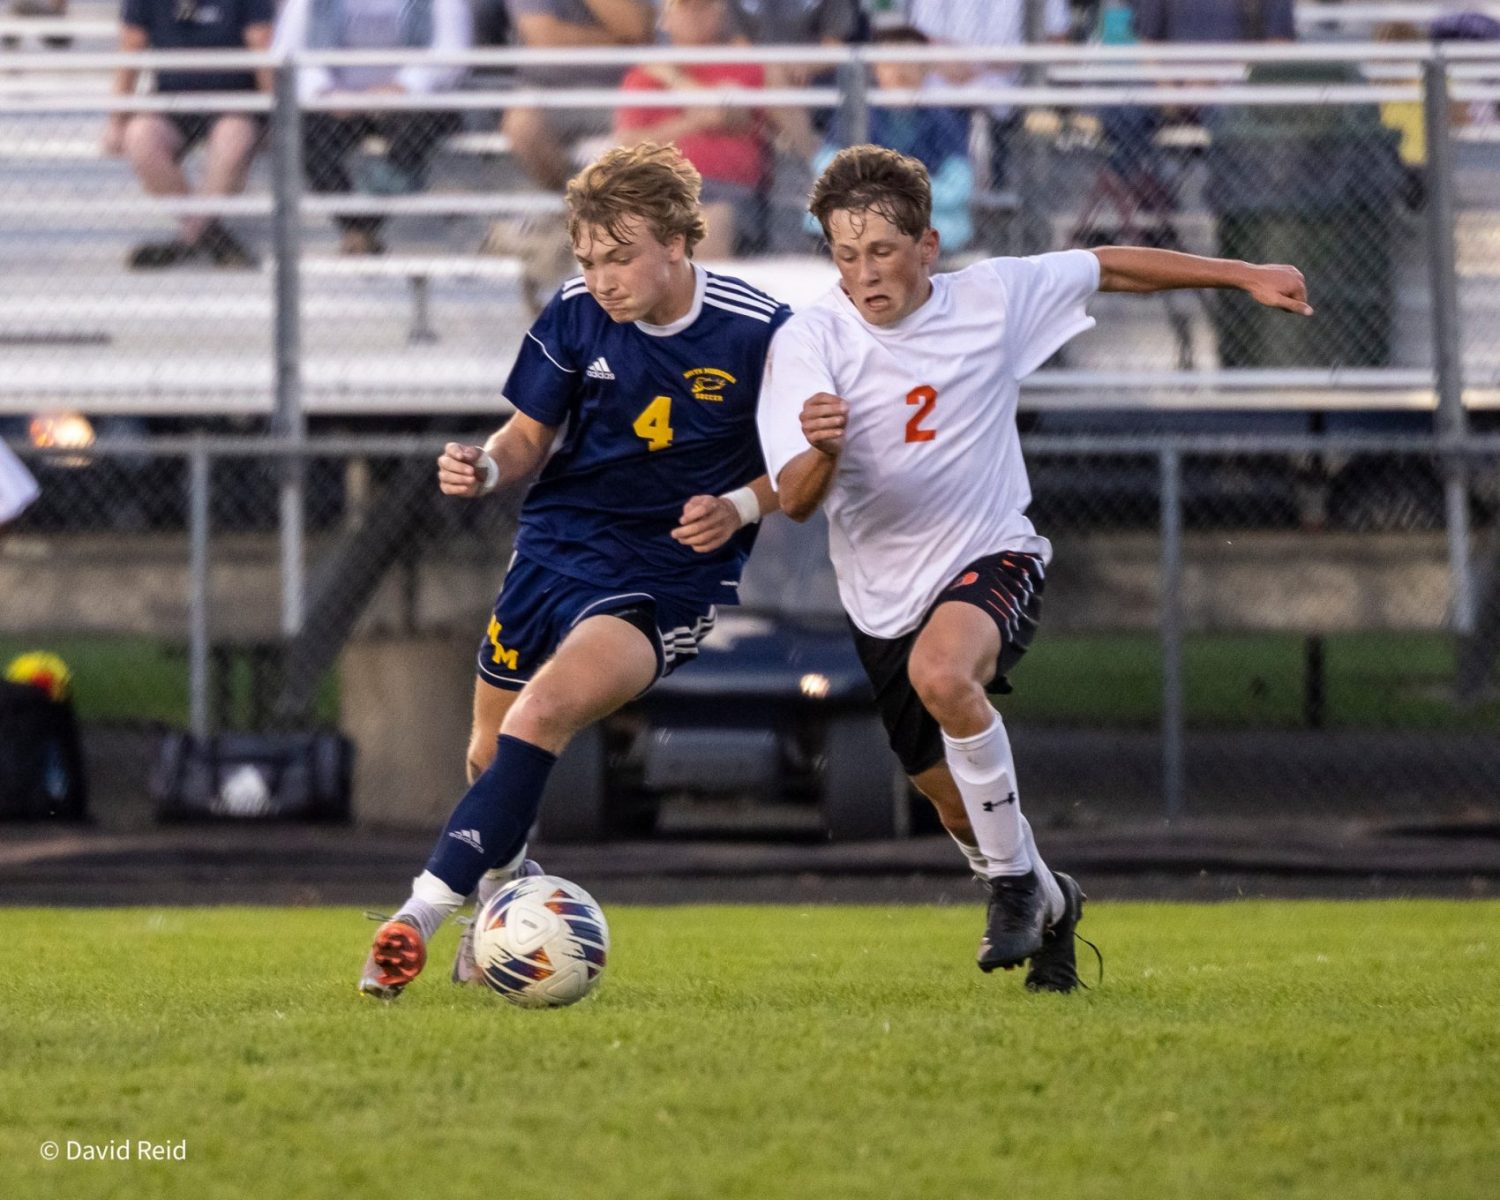 North Muskegon snaps Ludington’s five-game winning streak with 2-1 win